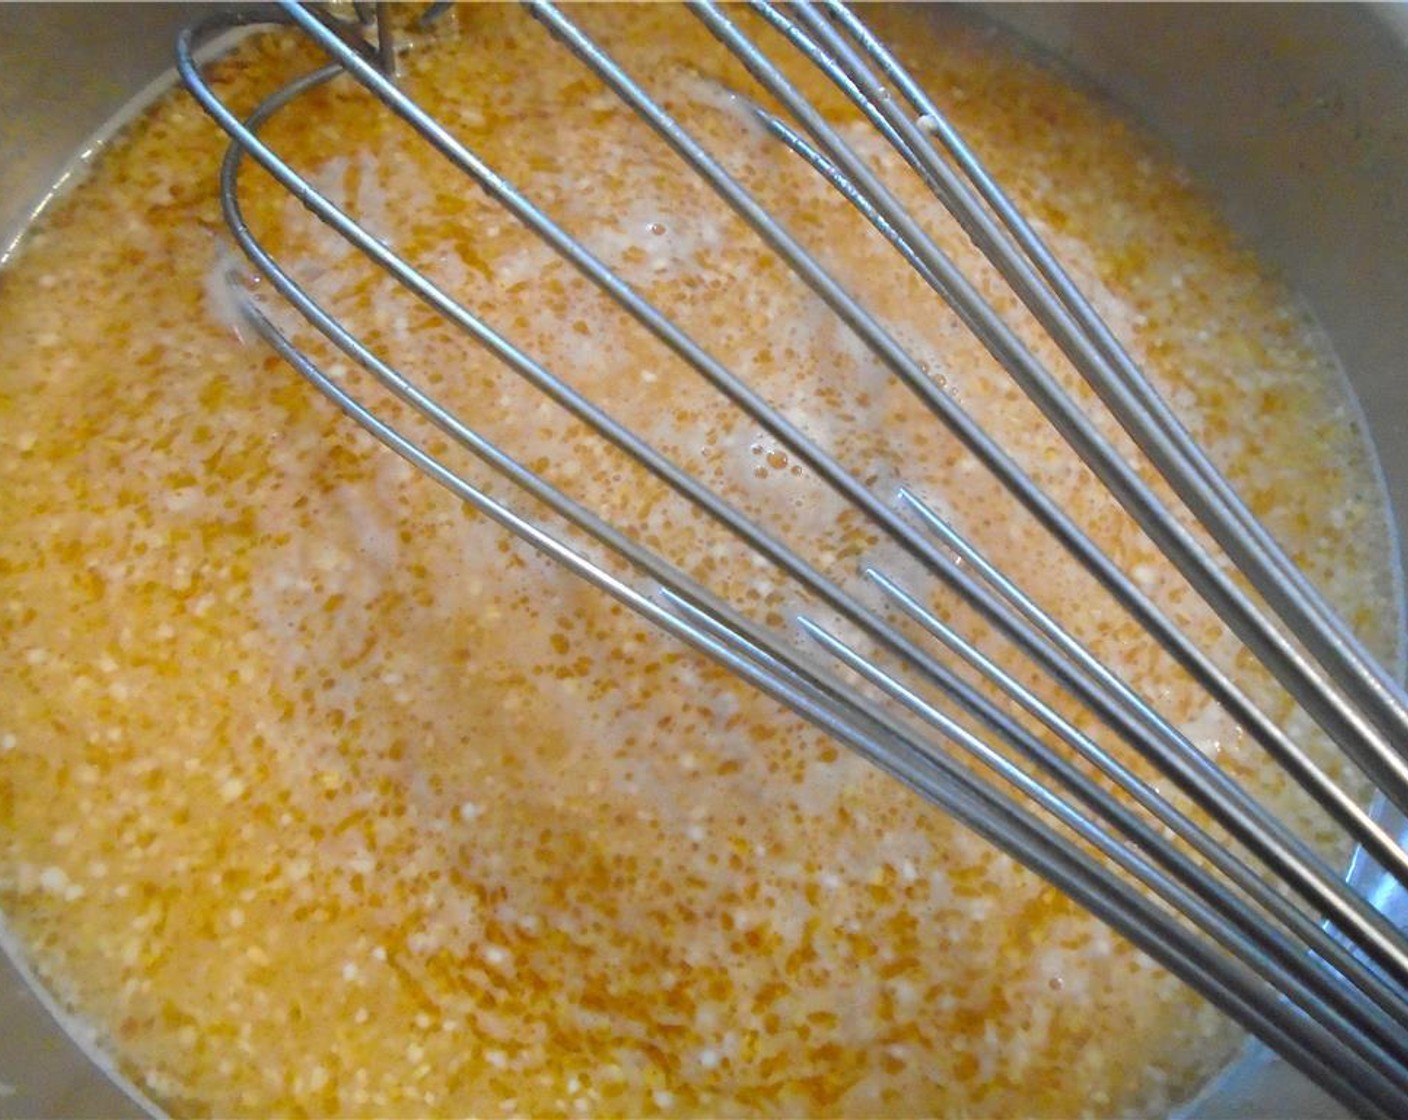 step 2 Add Coarse Cornmeal (1 1/2 cups) and simmer until cornmeal is soft, about 40 minutes.